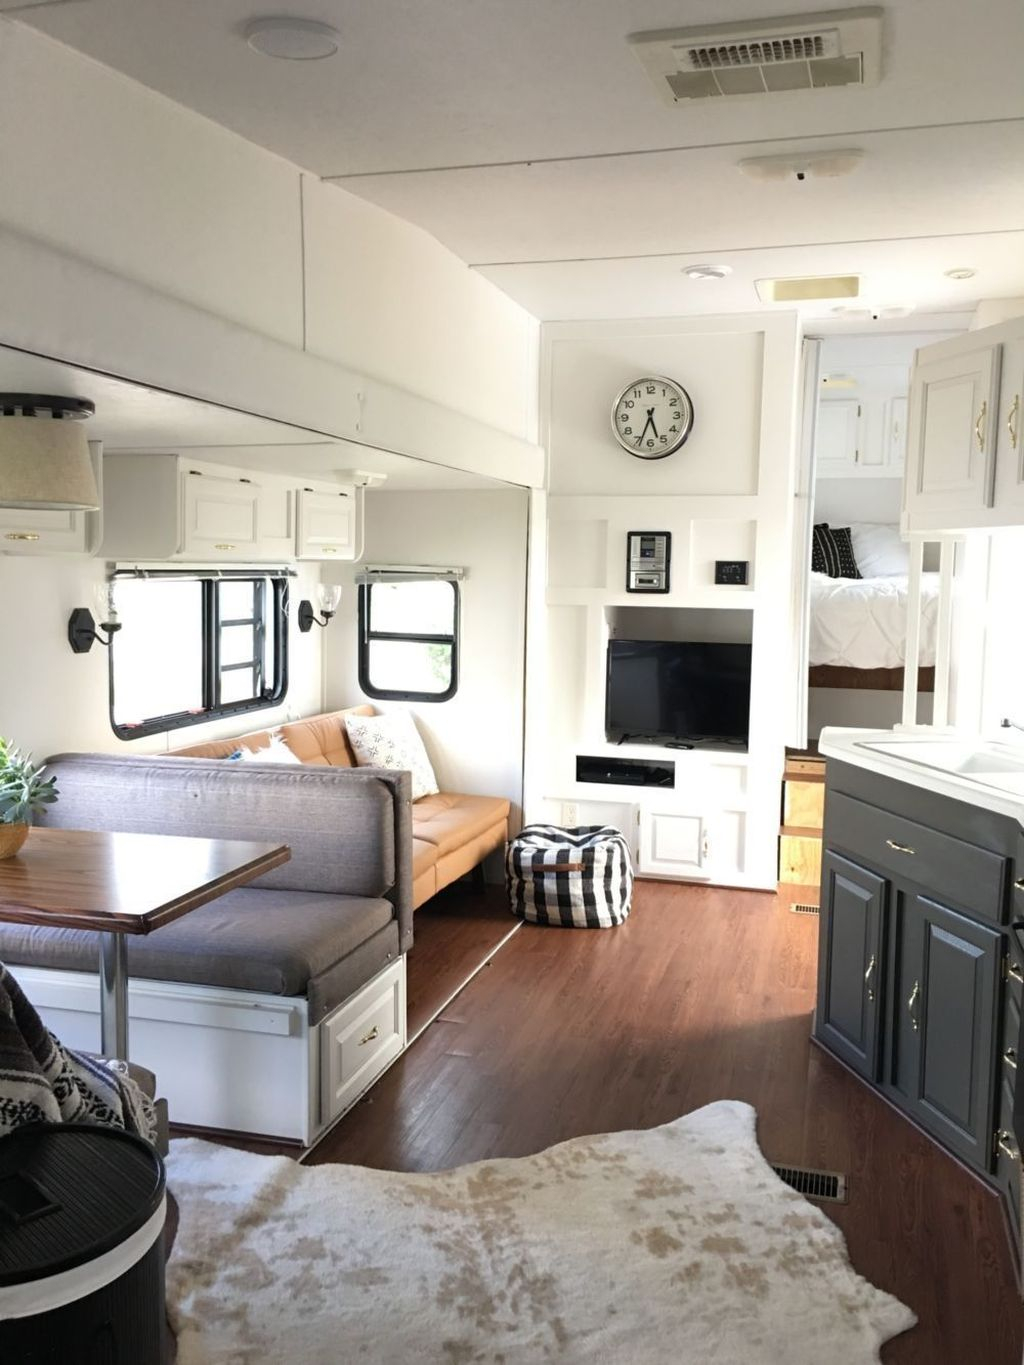 Awesome Rv Living Room Remodel Design33